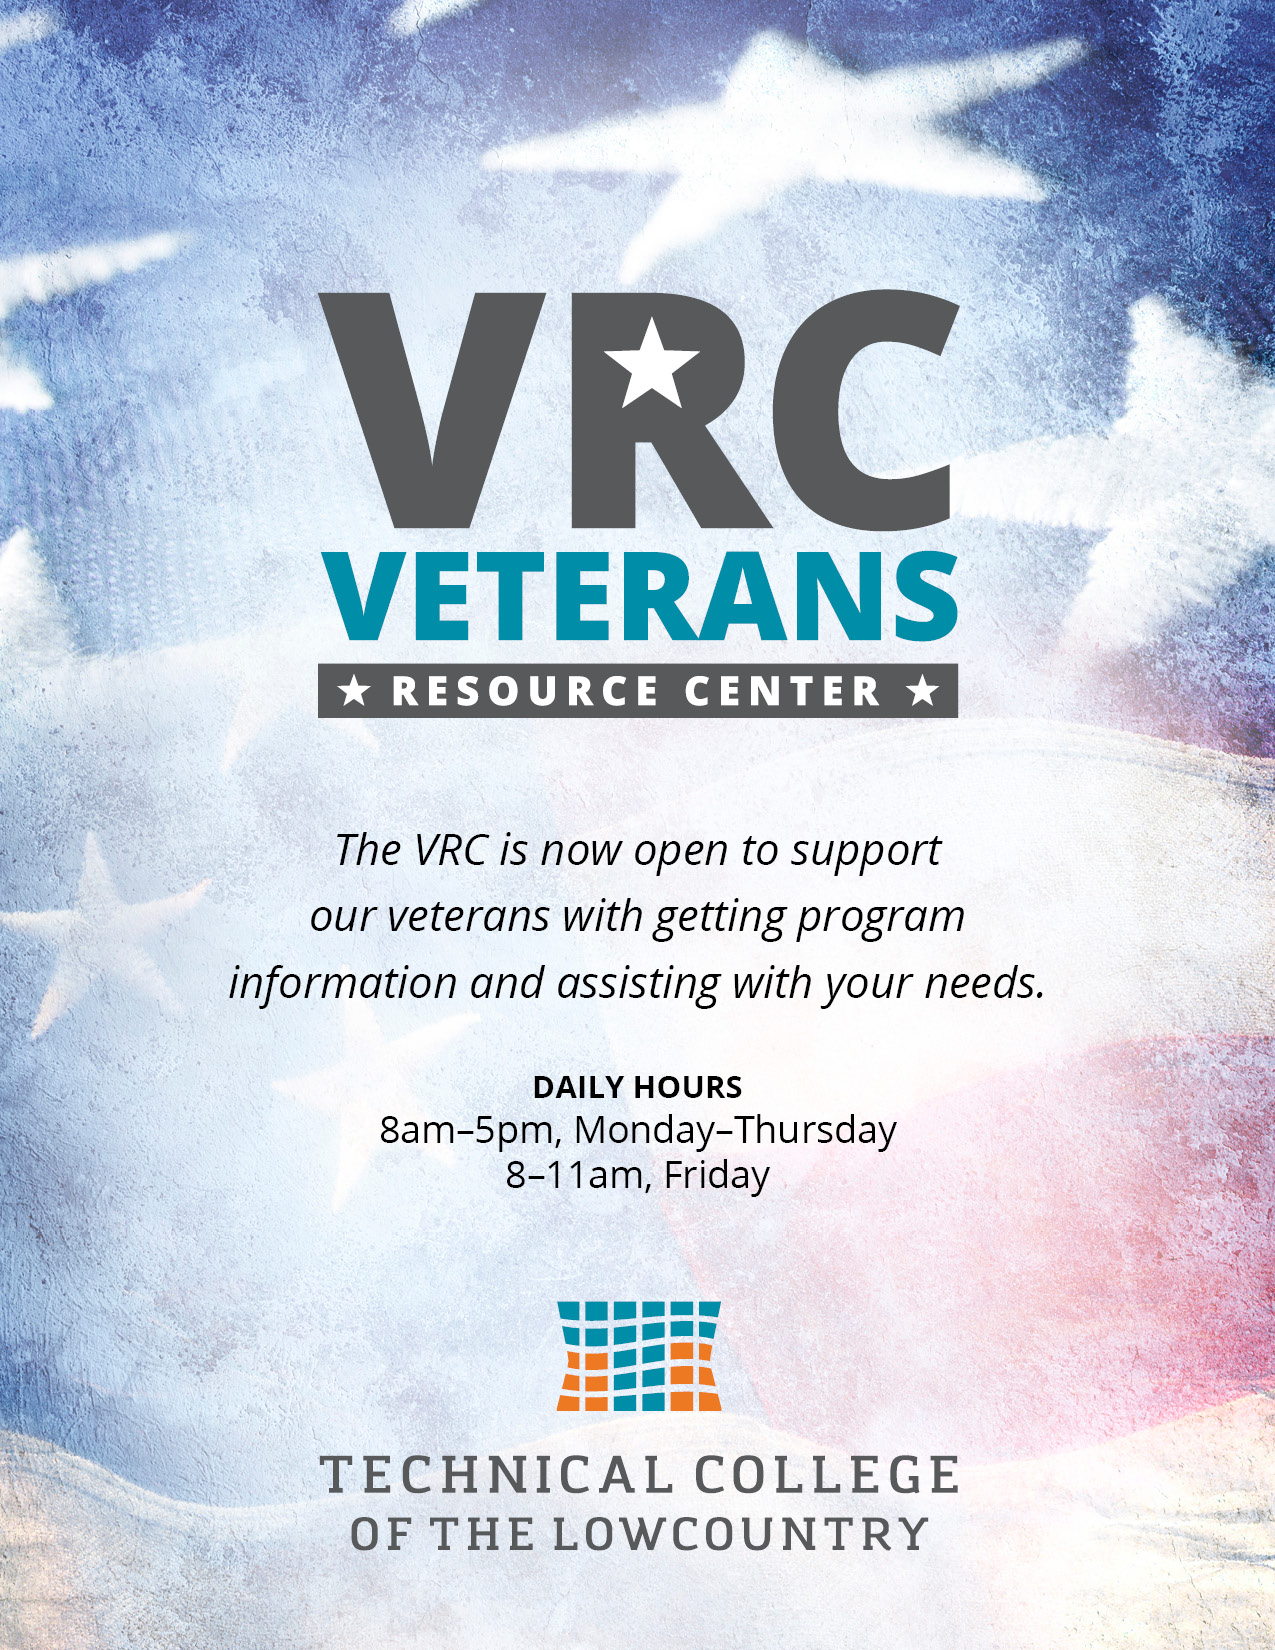 TCL Veterans Resource Center is virtually open for checking in with friends, getting program information, and assisting with all your needs. Daily hours are 11 a.m. to noon, Monday through Thursday, until we reopen our on-campus location. Zoom meeting ID is 412-998-0203.